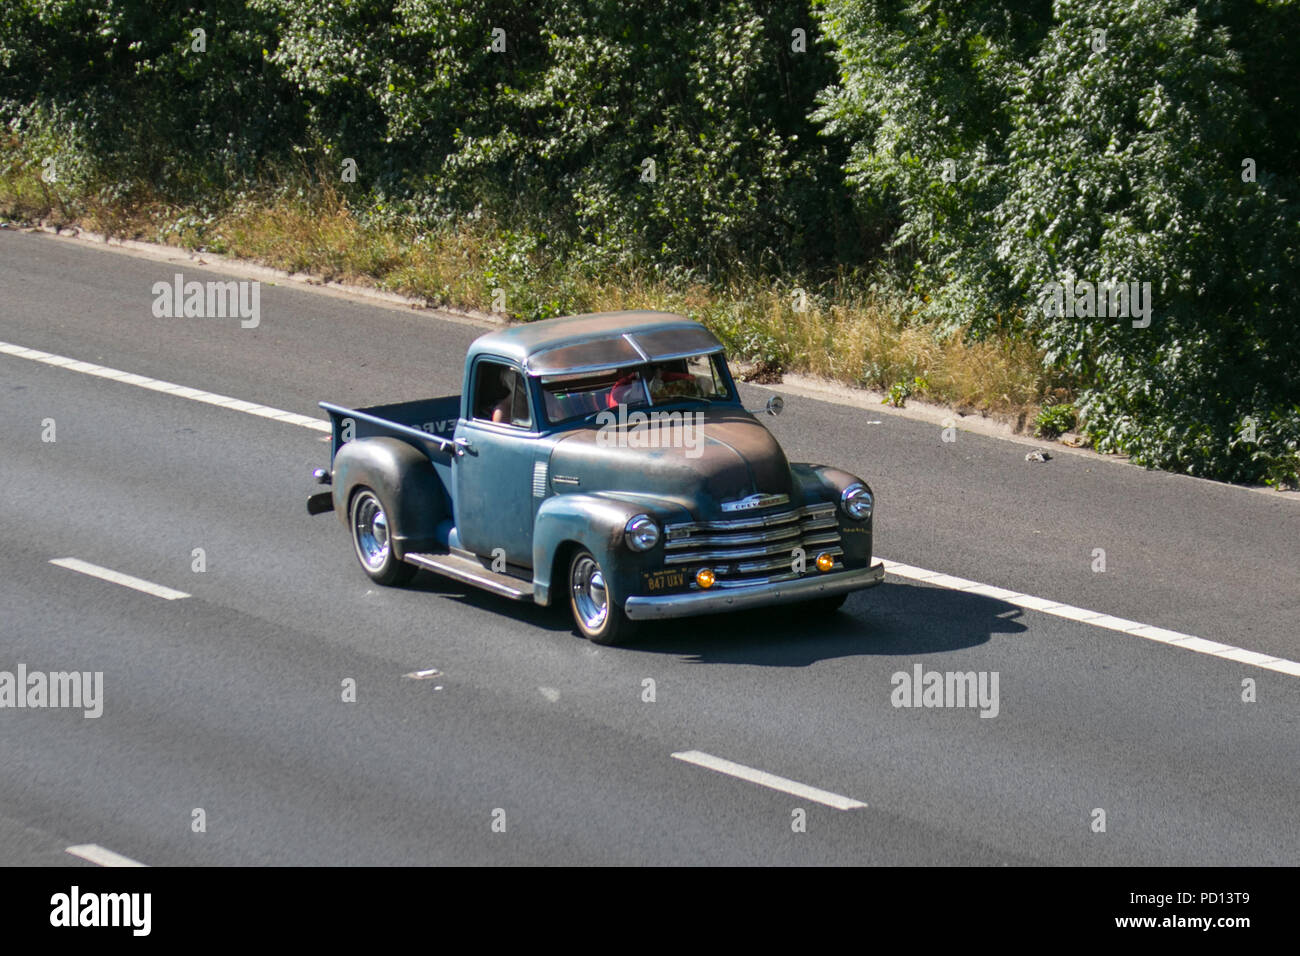 847UXV green 1951 Chevrolet SUV truck  UK Vehicular traffic, transport, collectible vehicles saloon cars, on the 3 lane M55 motorway highway, Blackpool, UK Stock Photo